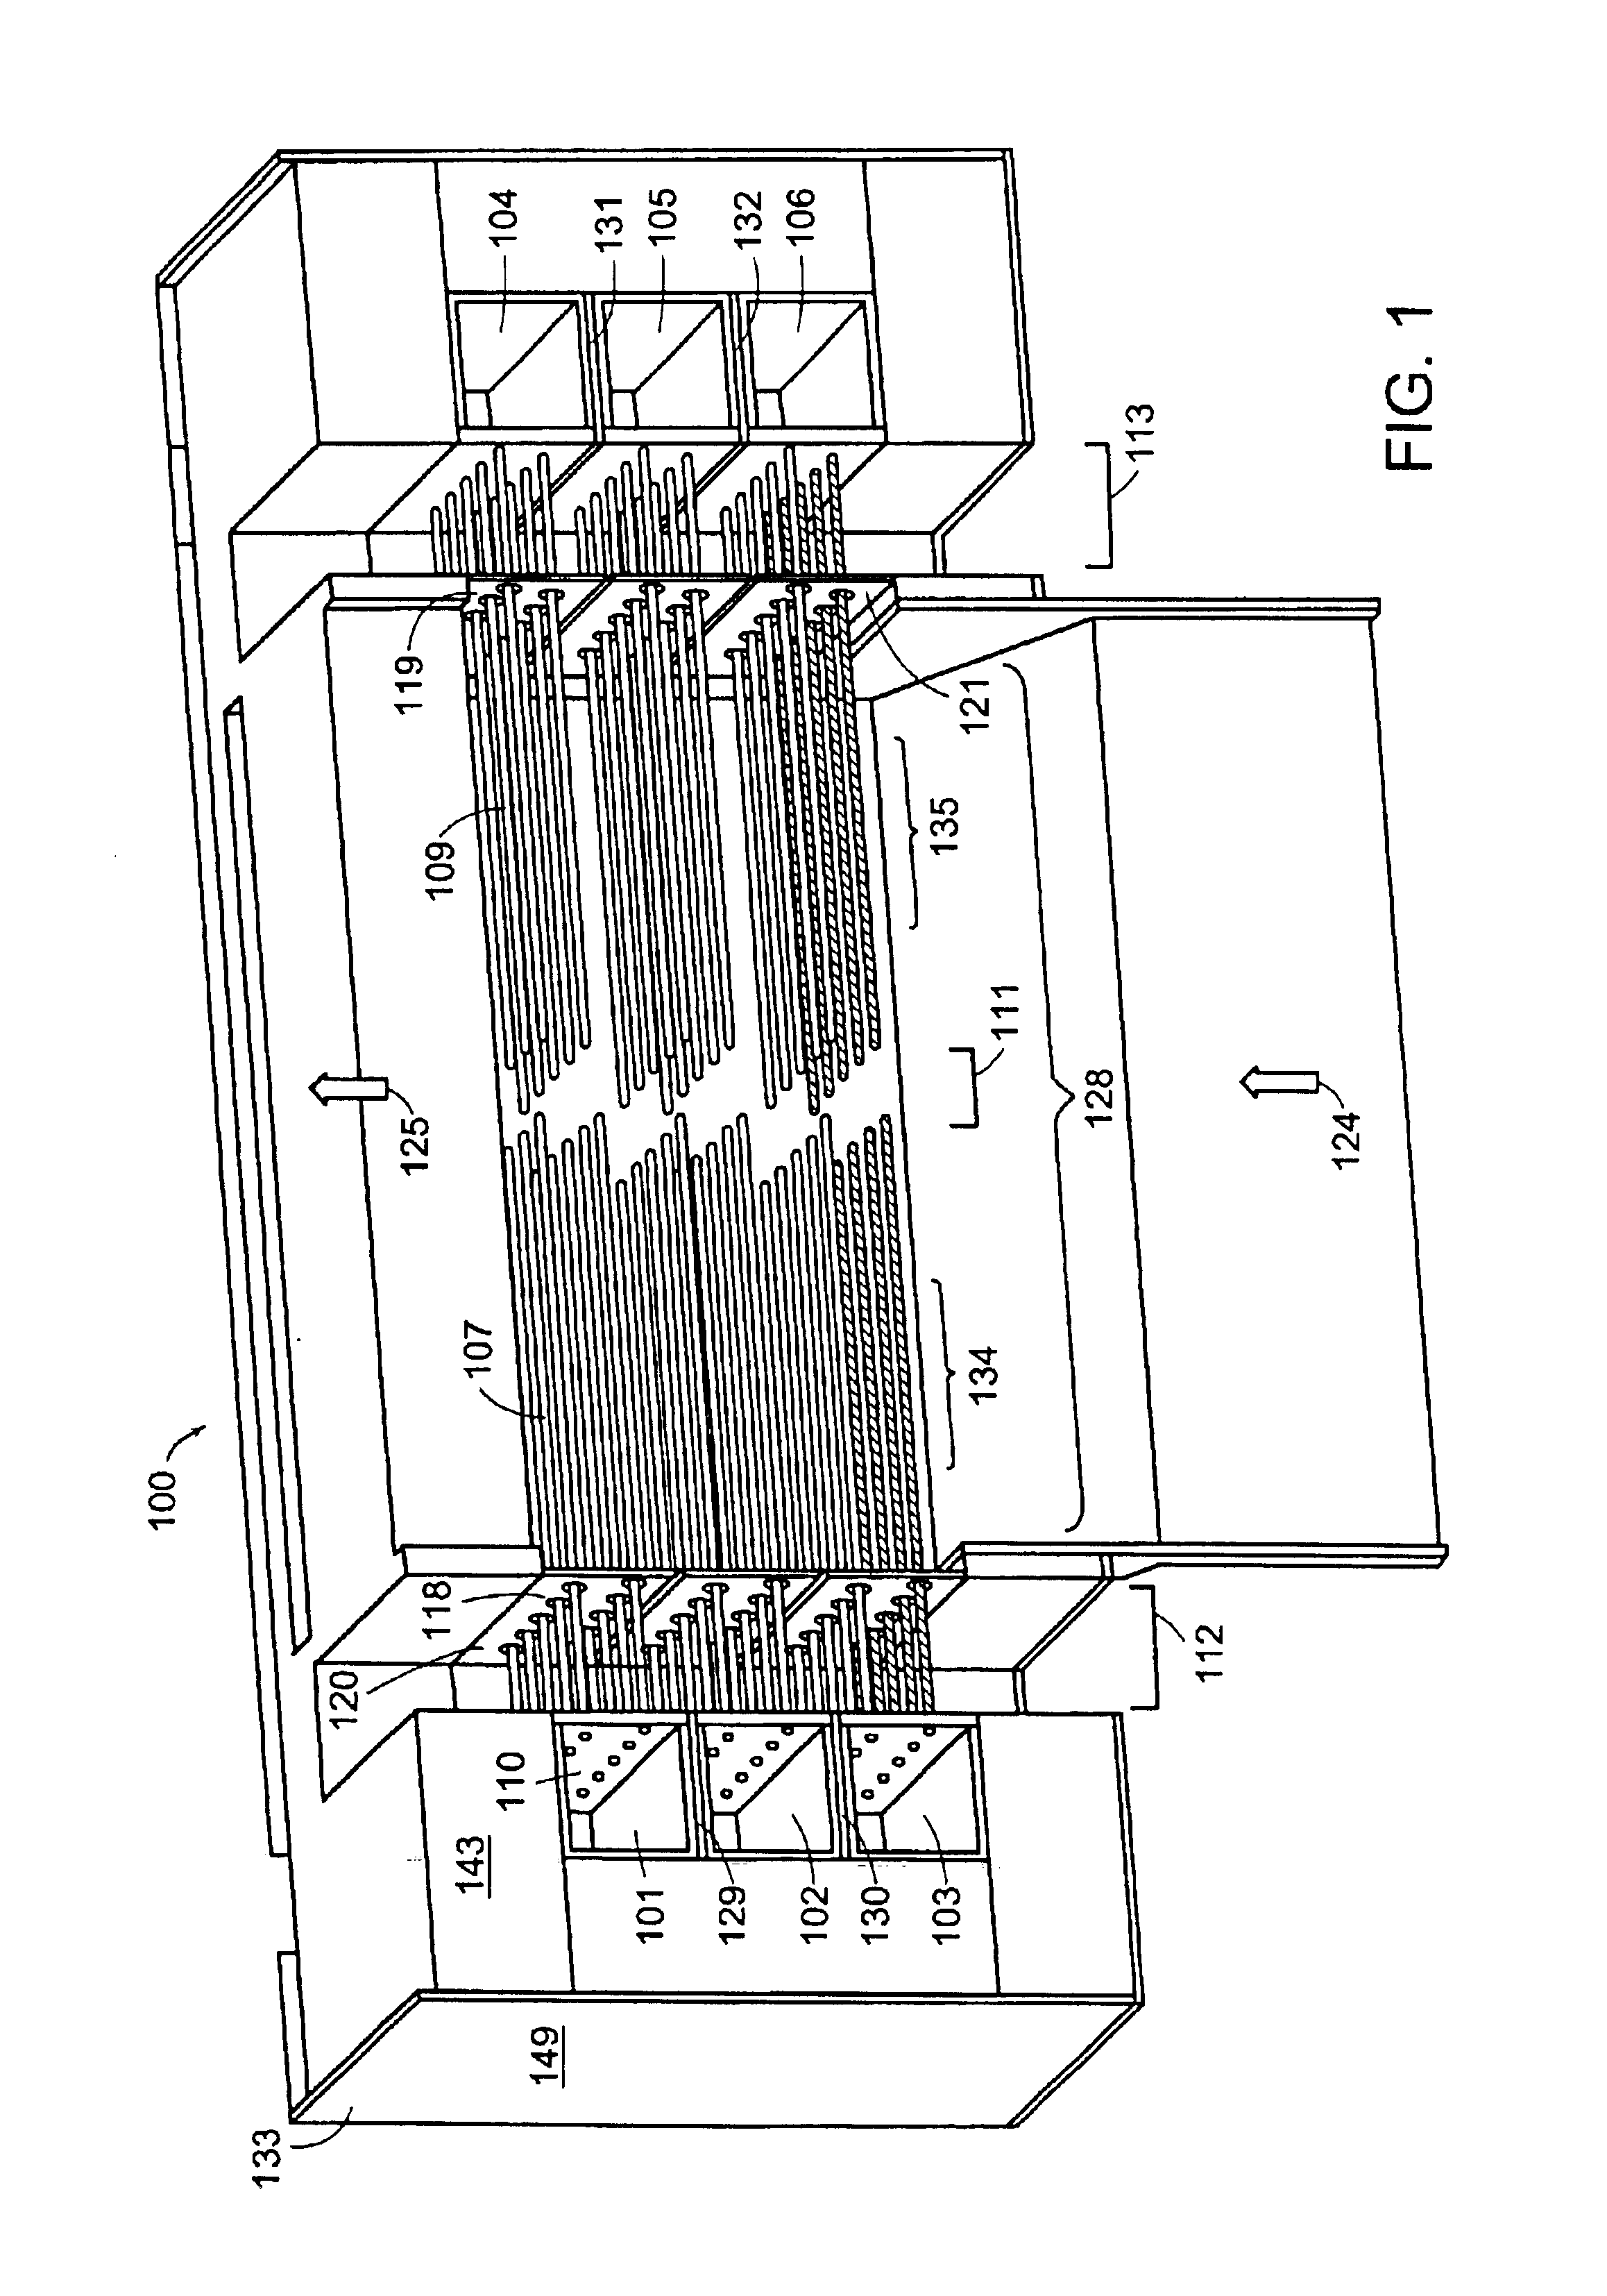 Horizontal fuel cell tube system and methods